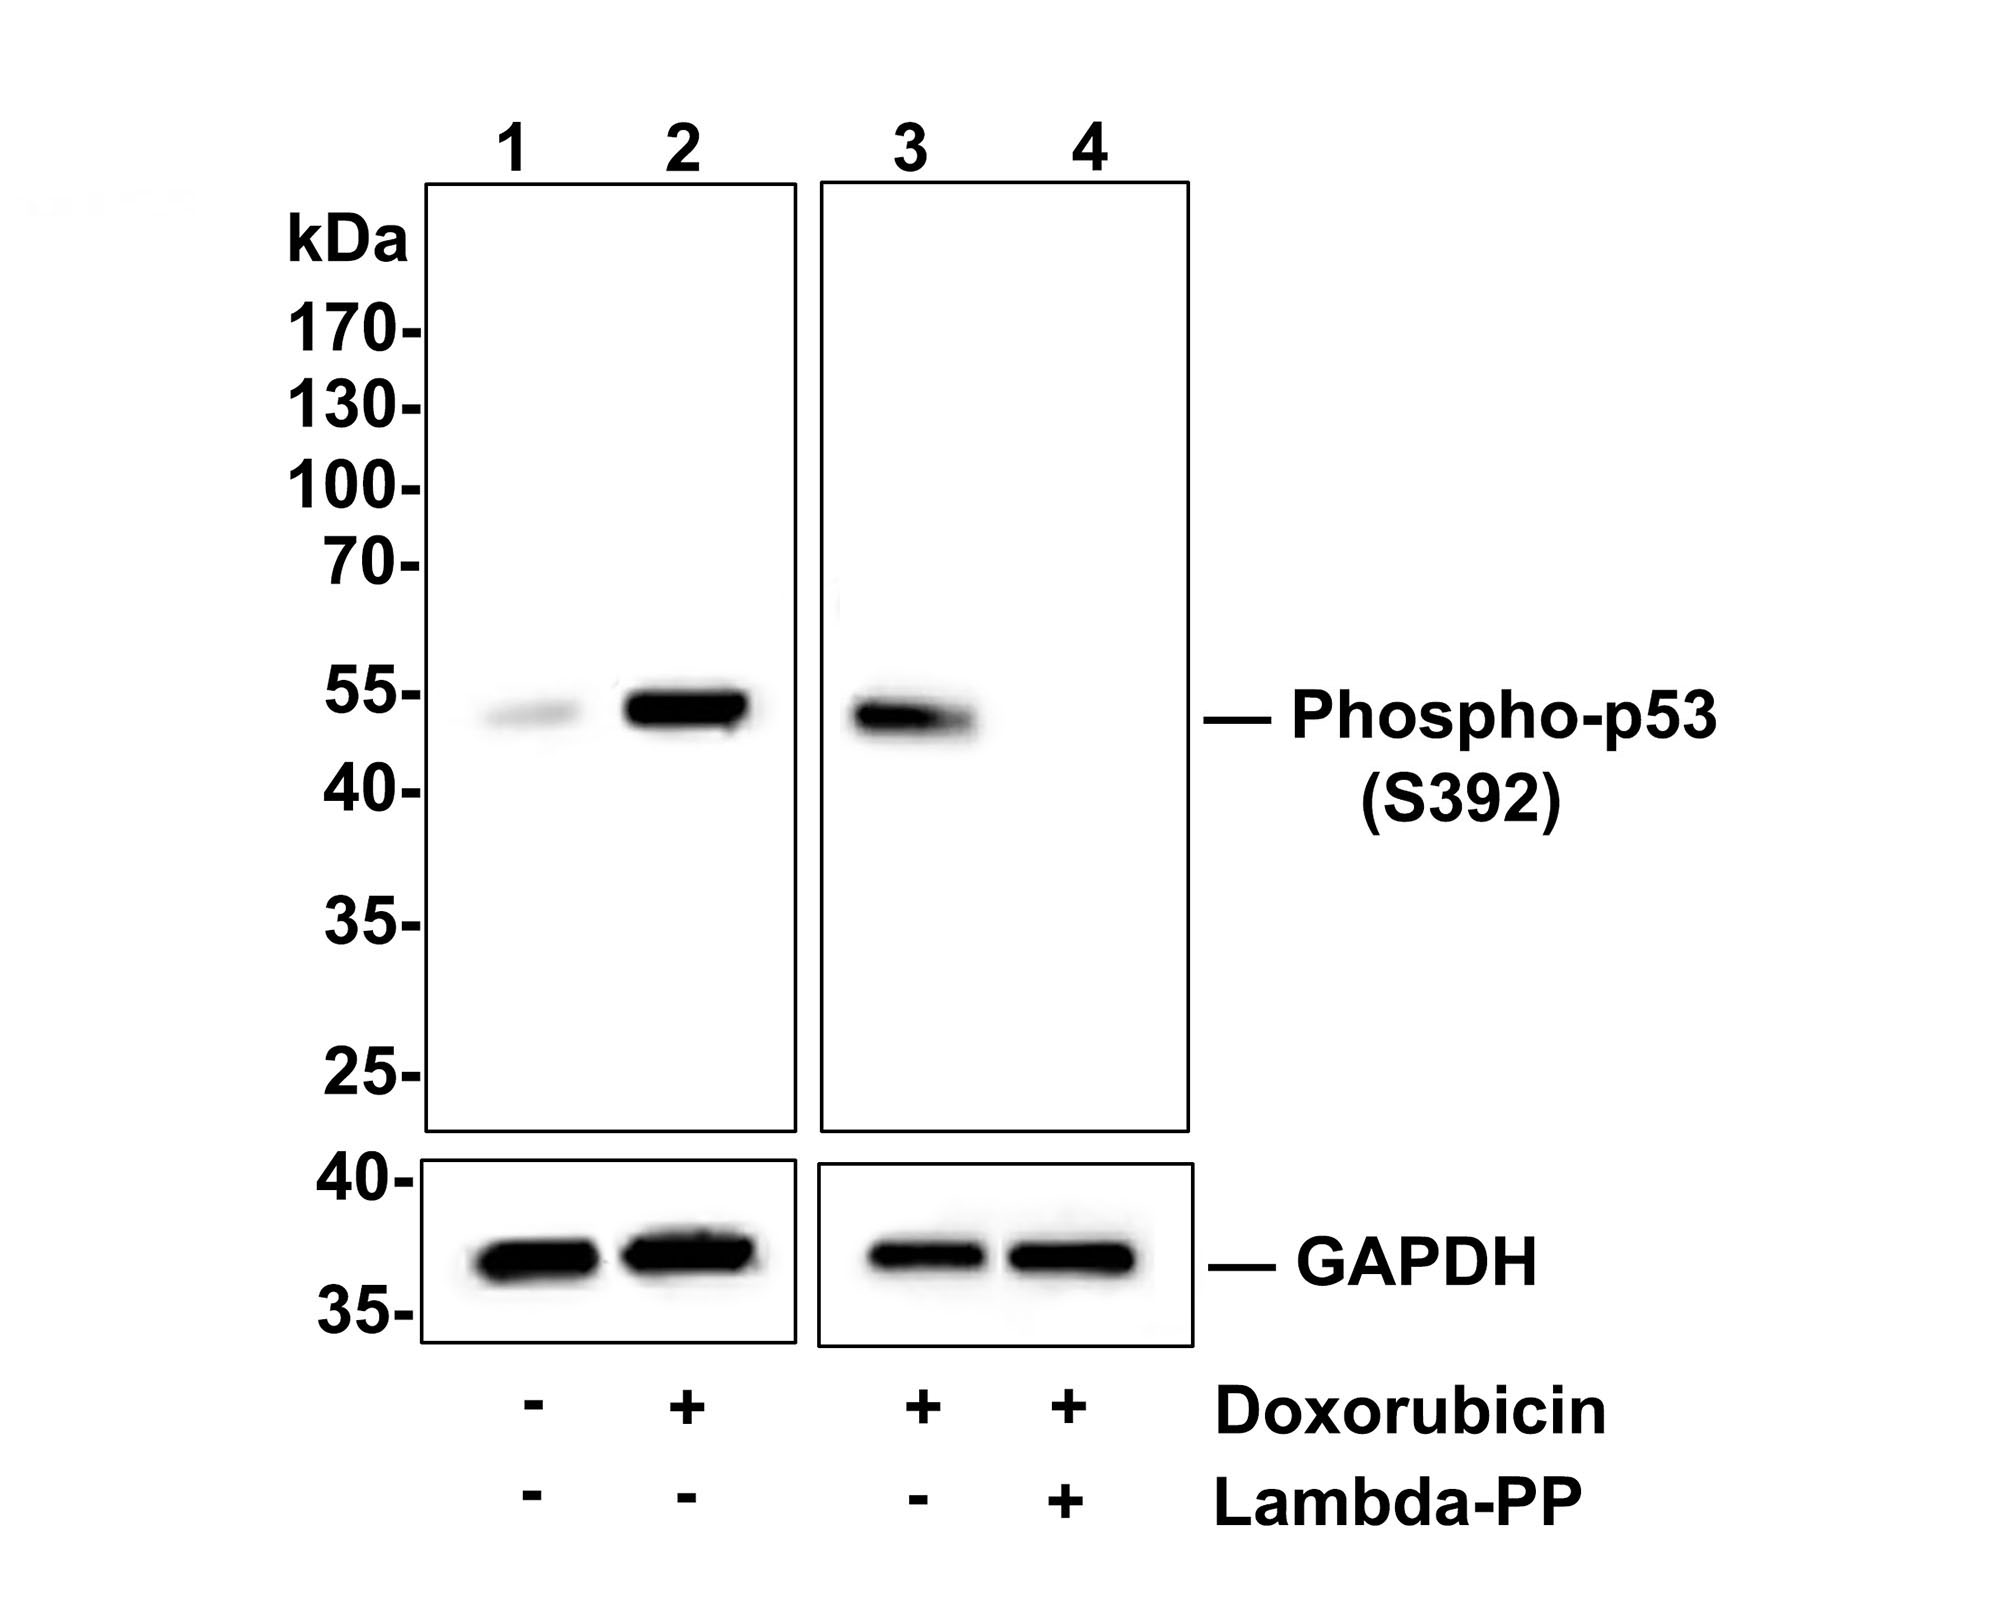 Western blot analysis of Phospho-p53(S392) on A549 cell lysates.<br />
<br />
Lane 1: A549 cells, whole cell lysate, 10ug/lane<br />
Lane 2/3: A549 cells treated with 250nM Doxorubicin overnight, whole cell lysates, 10ug/lane<br />
Lane 4: A549 cells treated with 250nM Doxorubicin overnight, then treated with 2.8ug/ul lambda-PP for 30 minutes, whole cell lysates, 10ug/lane<br />
<br />
All lanes :<br />
Anti-Phospho-p53(S392) antibody (ET1606-24) at 1:500 dilution. Anti-GAPDH antibody (ET1601-4) at 1:10,000 dilution. Goat Anti-Rabbit IgG H&L (HRP) (HA1001) at 1/200,000 dilution.<br />
<br />
Predicted band size: 53 kDa<br />
Observed band size: 53 kDa<br />
<br />
Blocking and diluting buffer: 5% BSA.<br />
<br />
Exposure time: 5 minutes